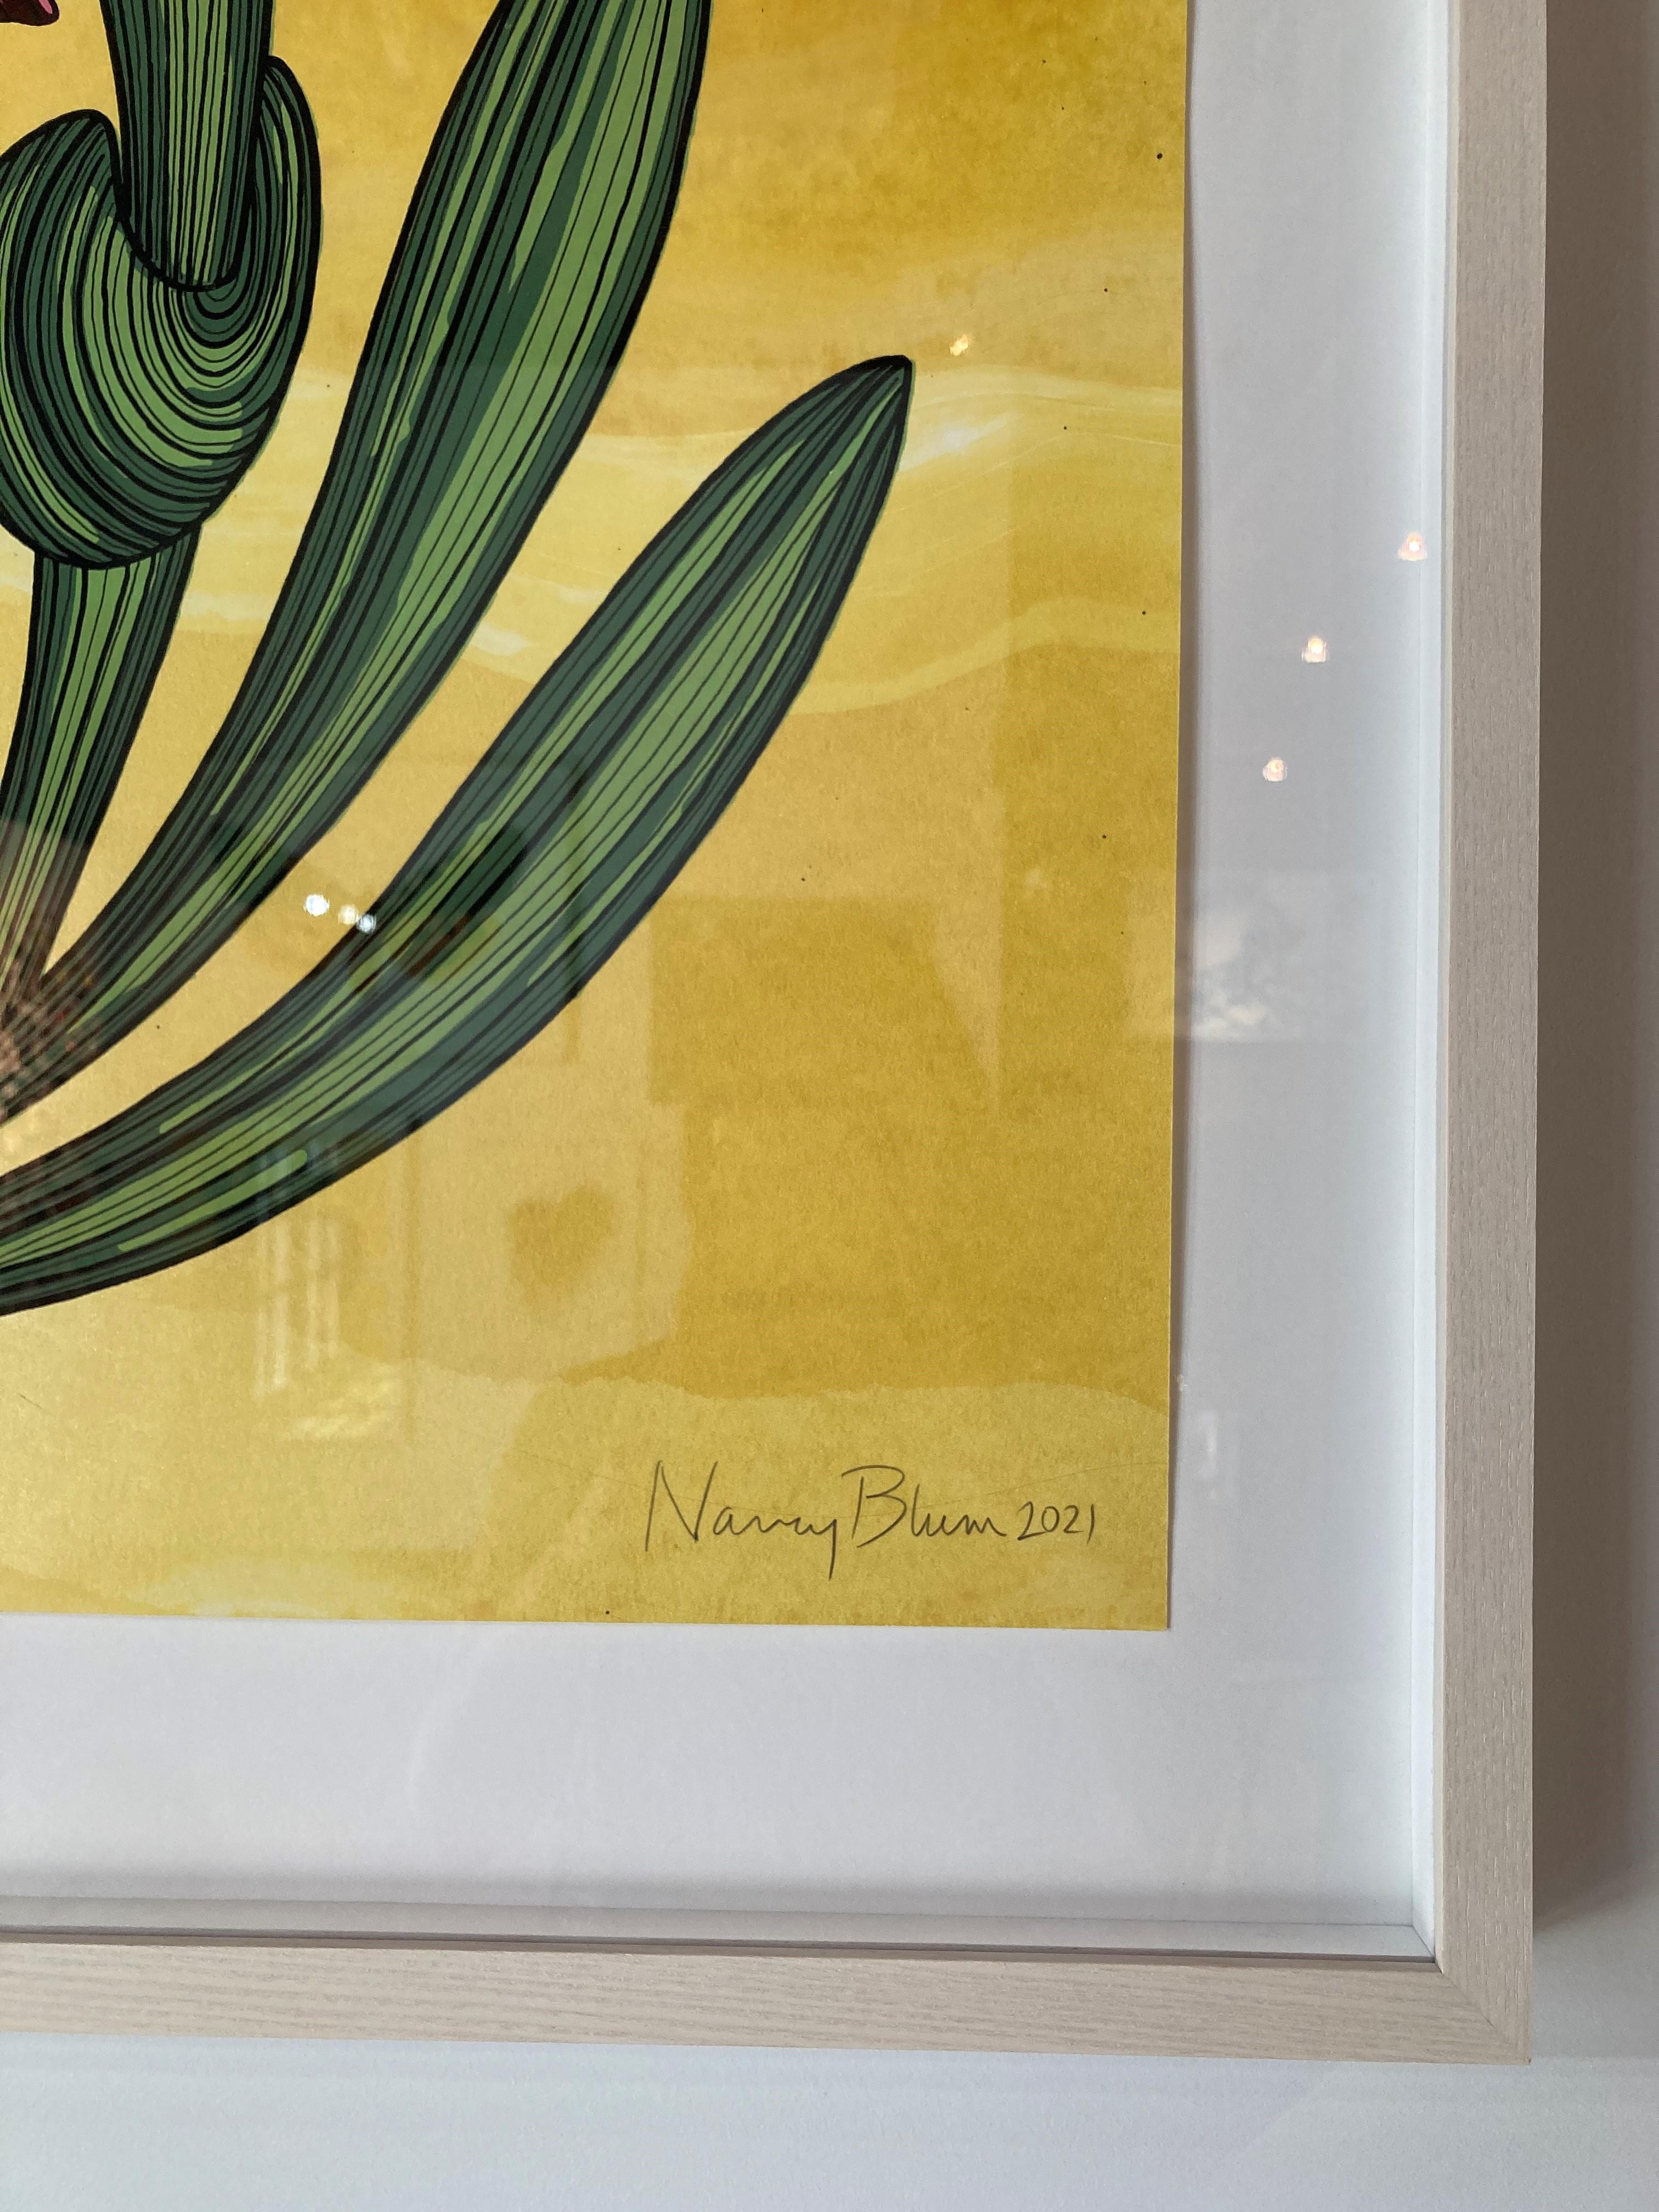 In this bright botanical work in pulled ink, silkscreen printing and hand-drawn lines on paper, a single dark magenta flower with verdant green leaves and stems is dramatic against a luminous yellow gold background. 

Signed, titled, dated and